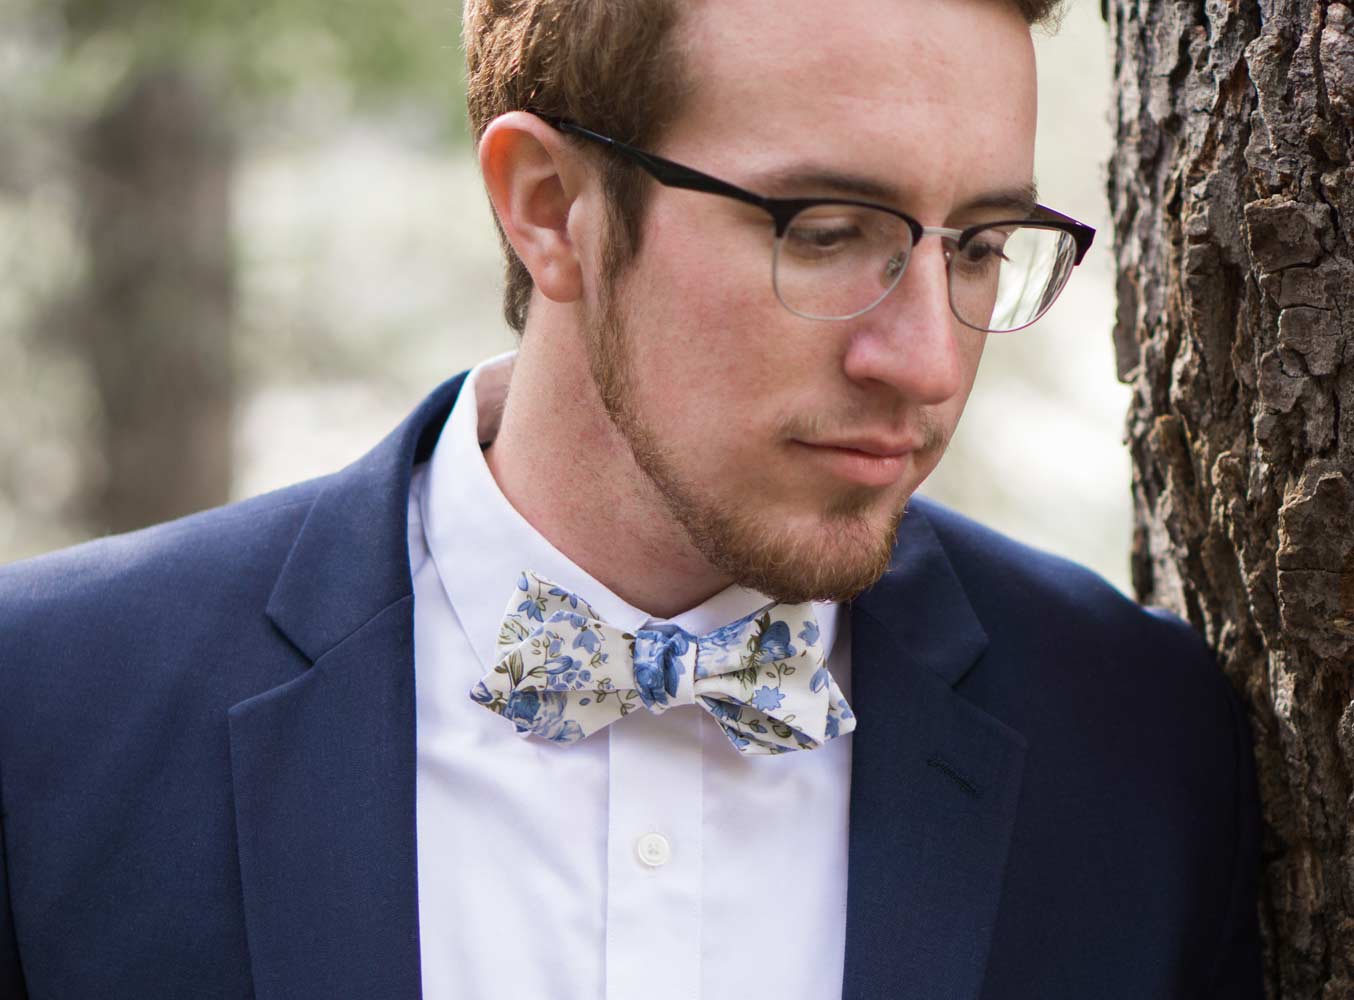 Frisco Bow Tie worn with a white shirt and navy blue suit jacket.